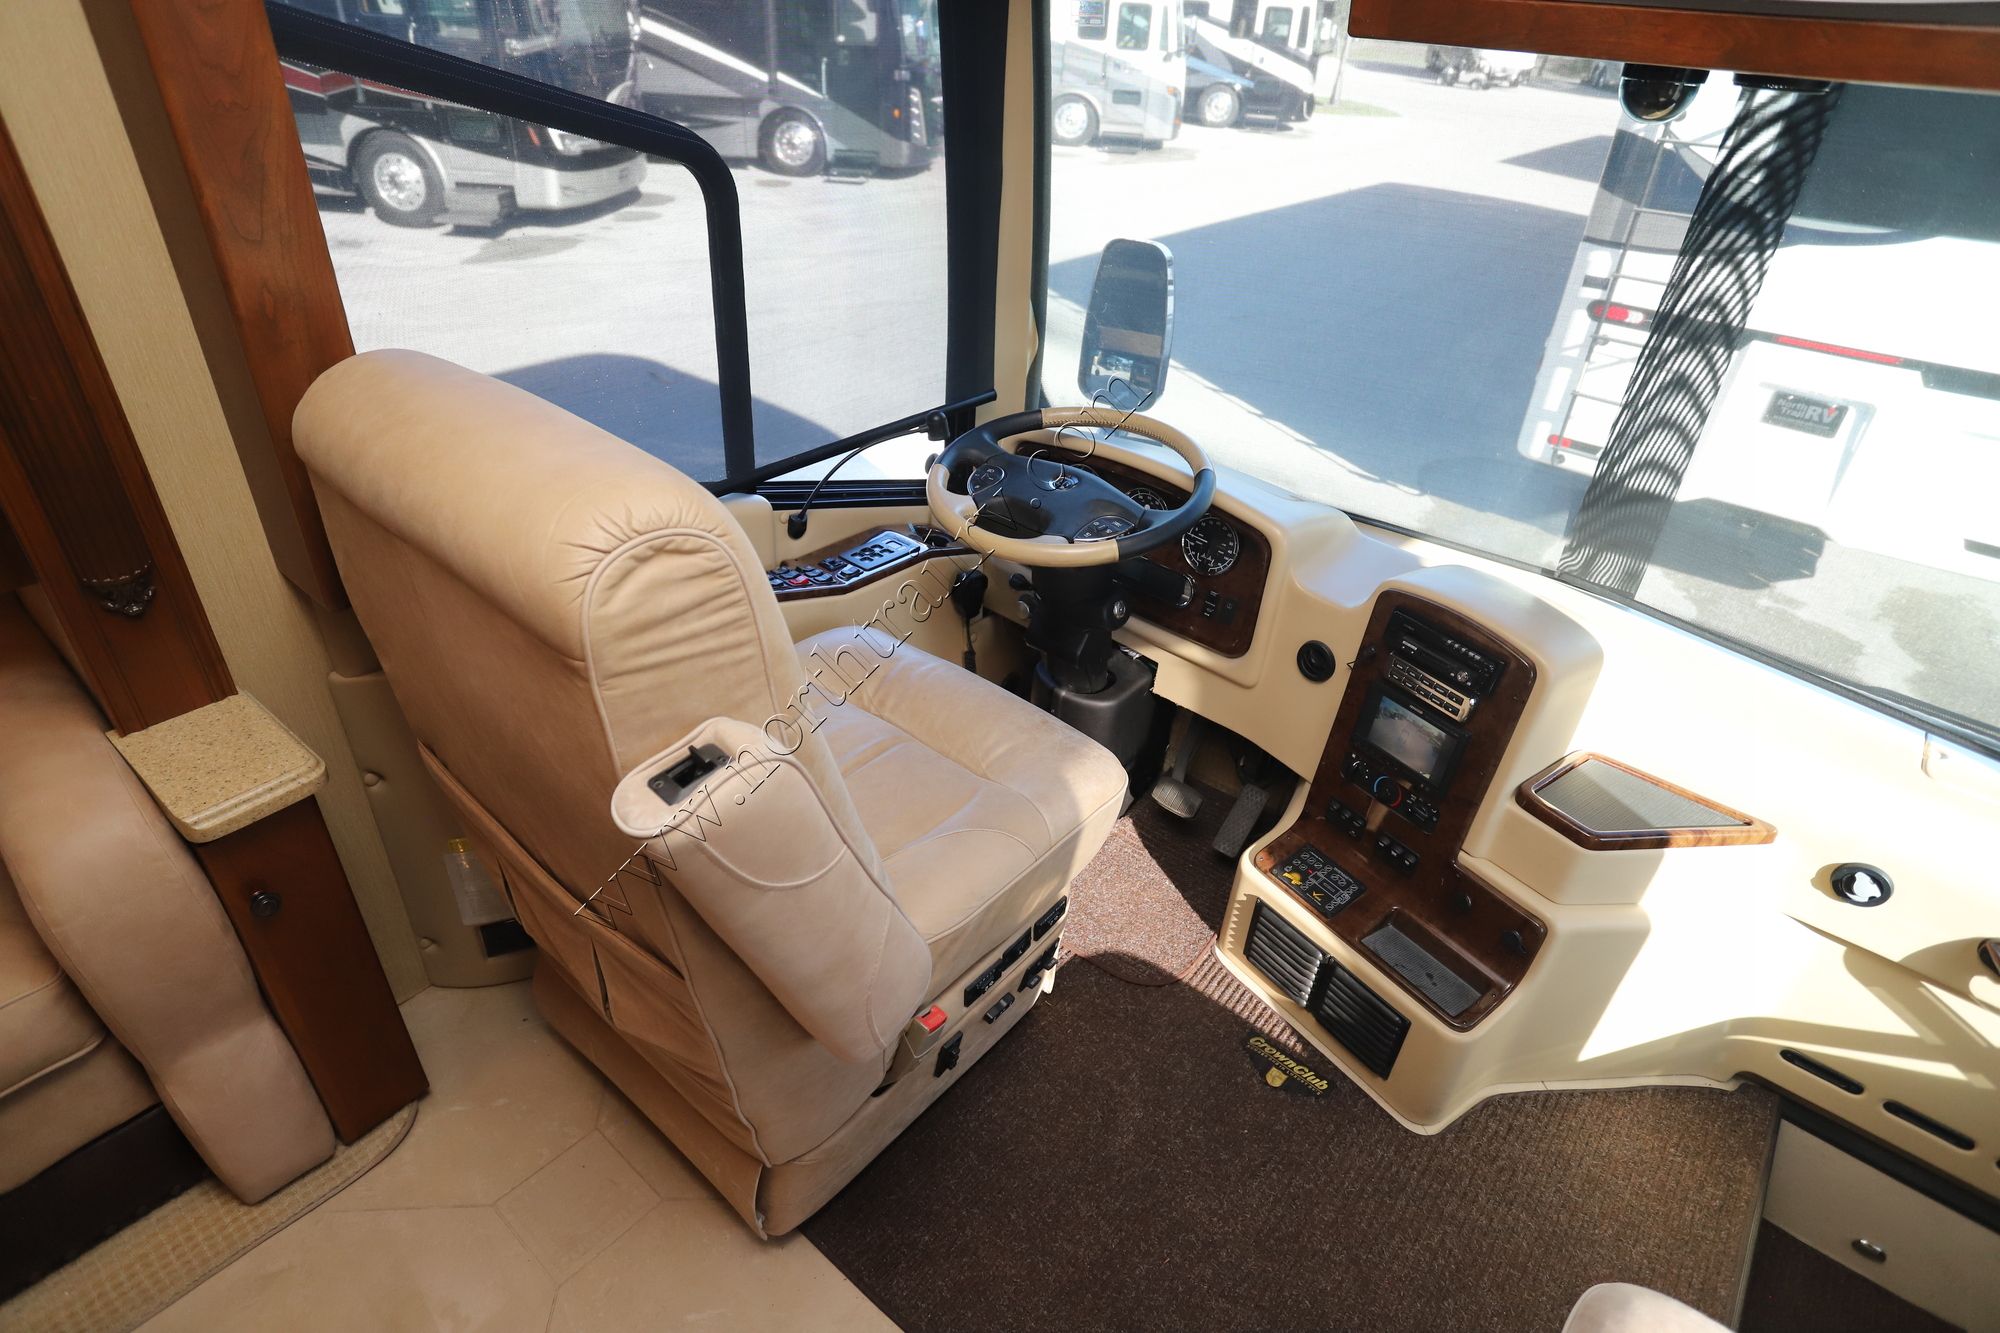 Used 2009 Holiday Rambler Navigator ADRIATIC Class A  For Sale